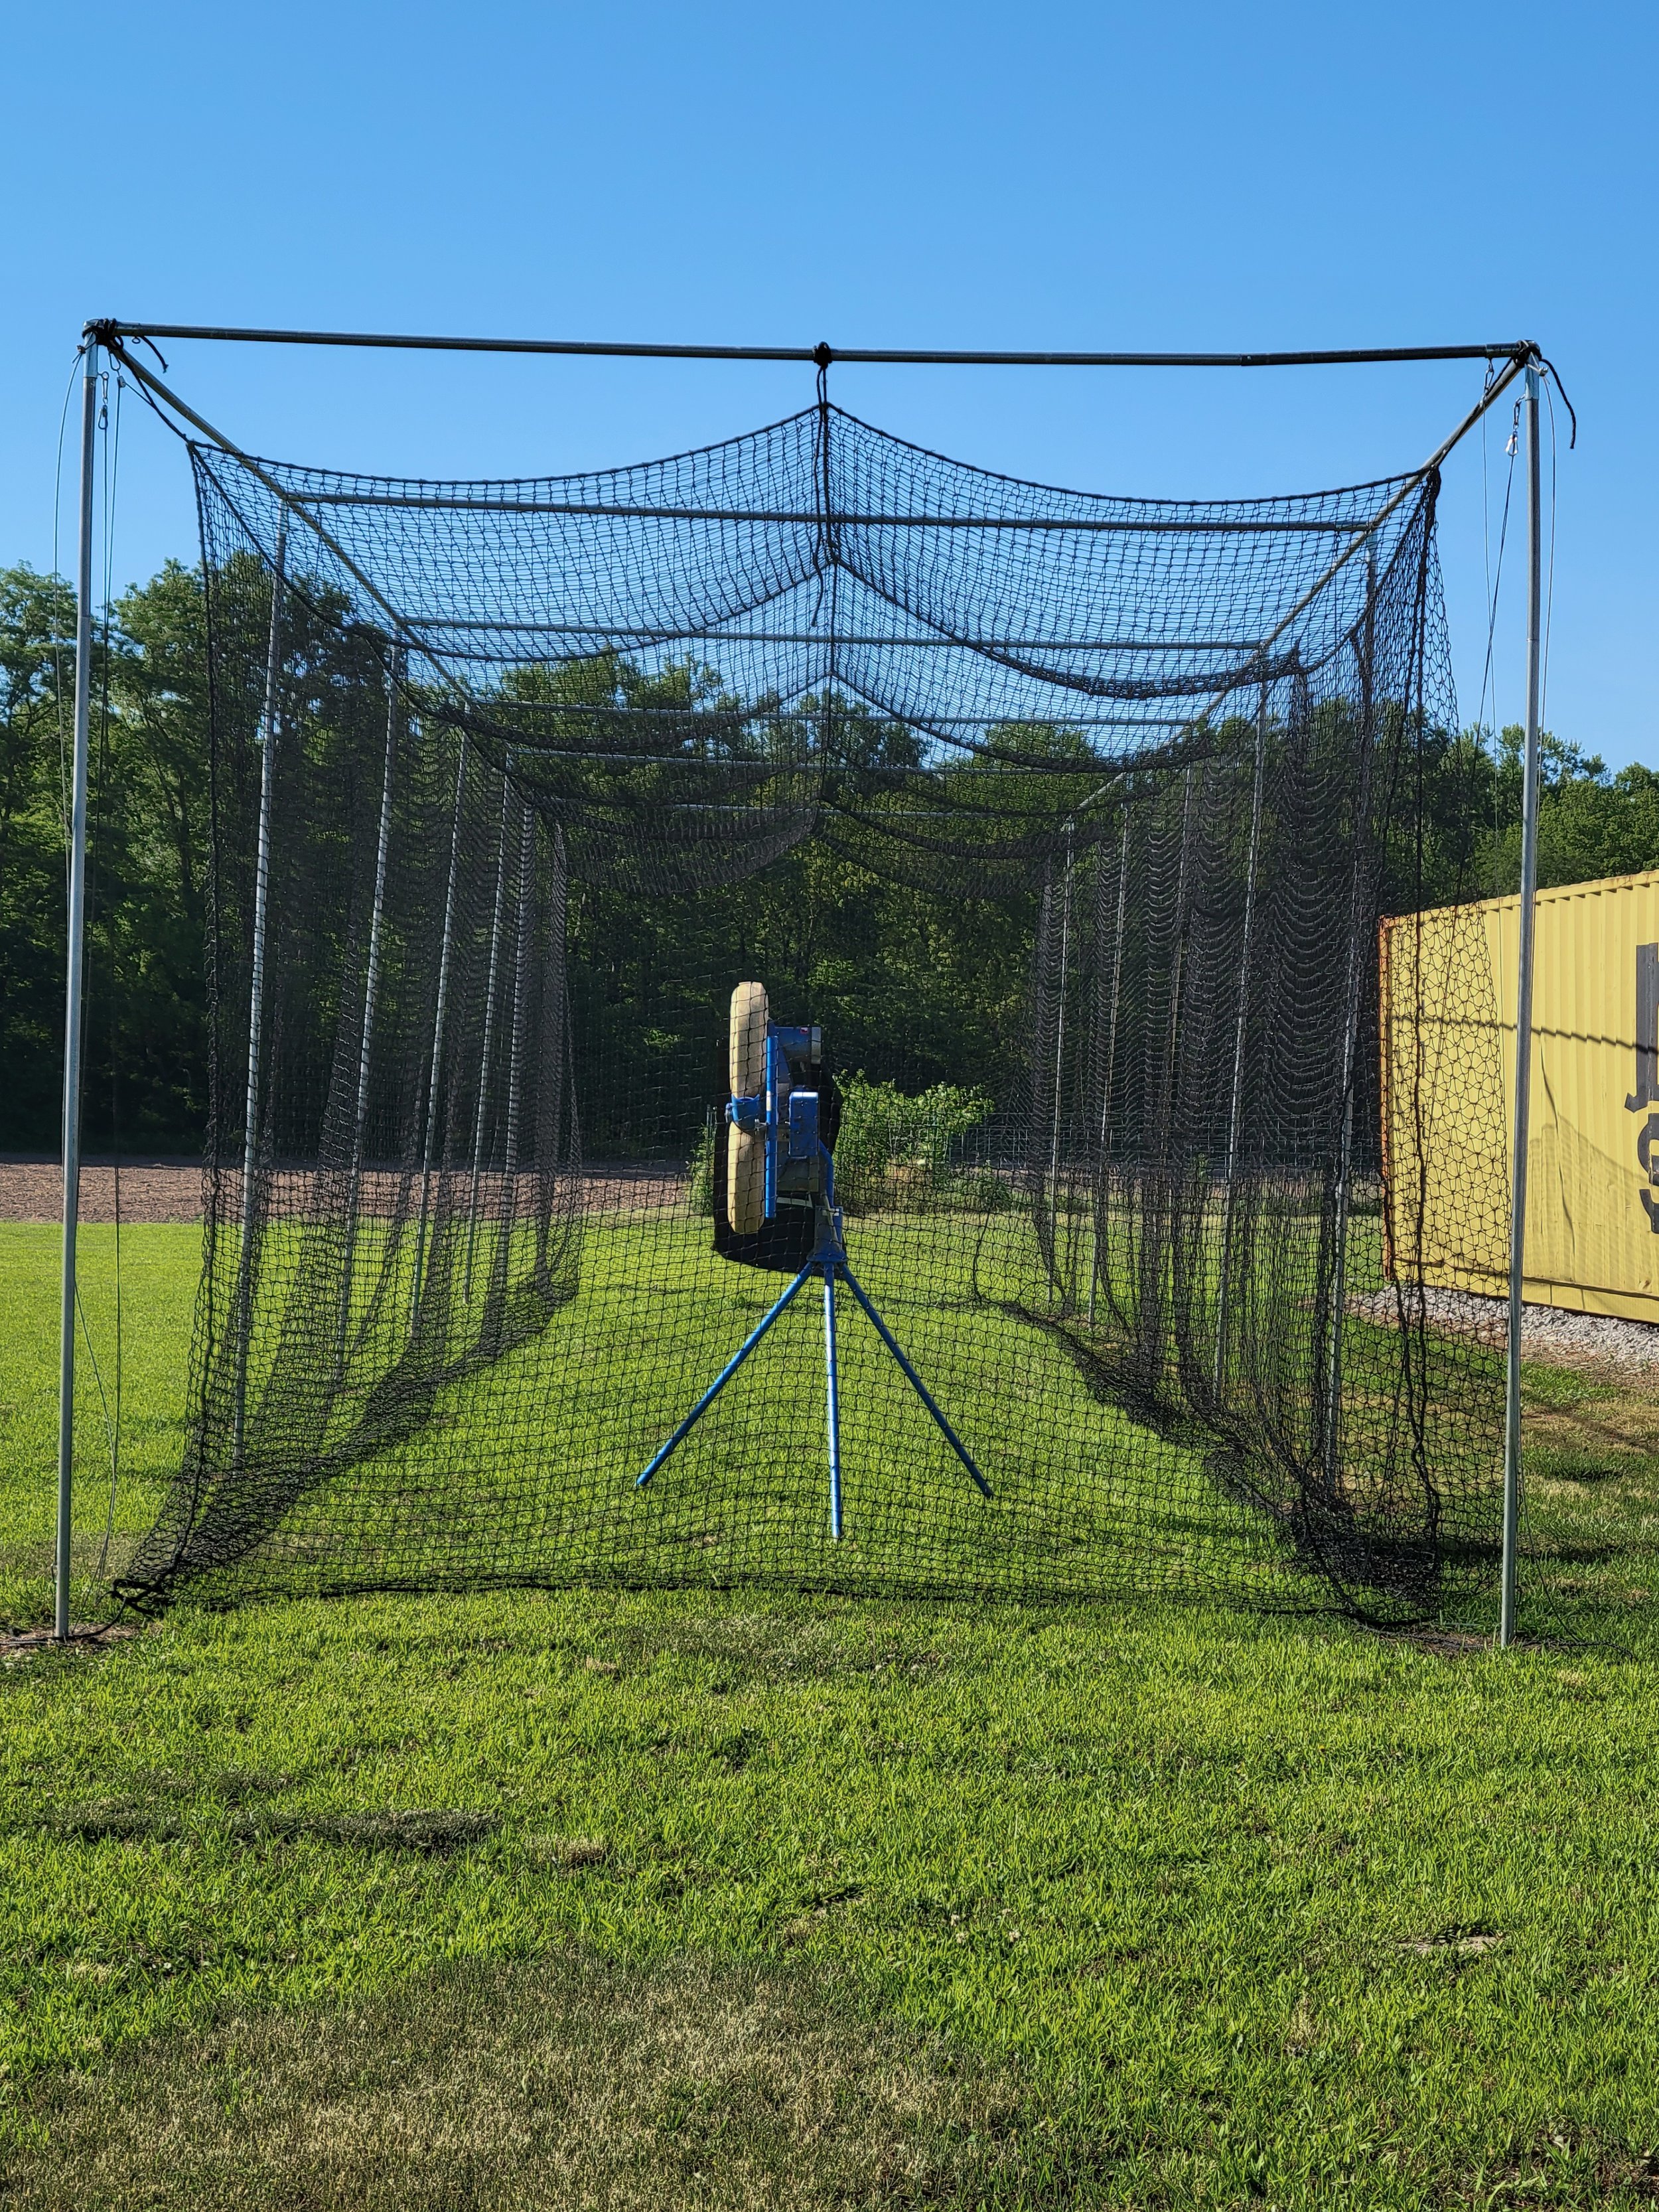 Details about   Batting Cage Baseball Softball Training Net with Steel Frame Cage Equipment 